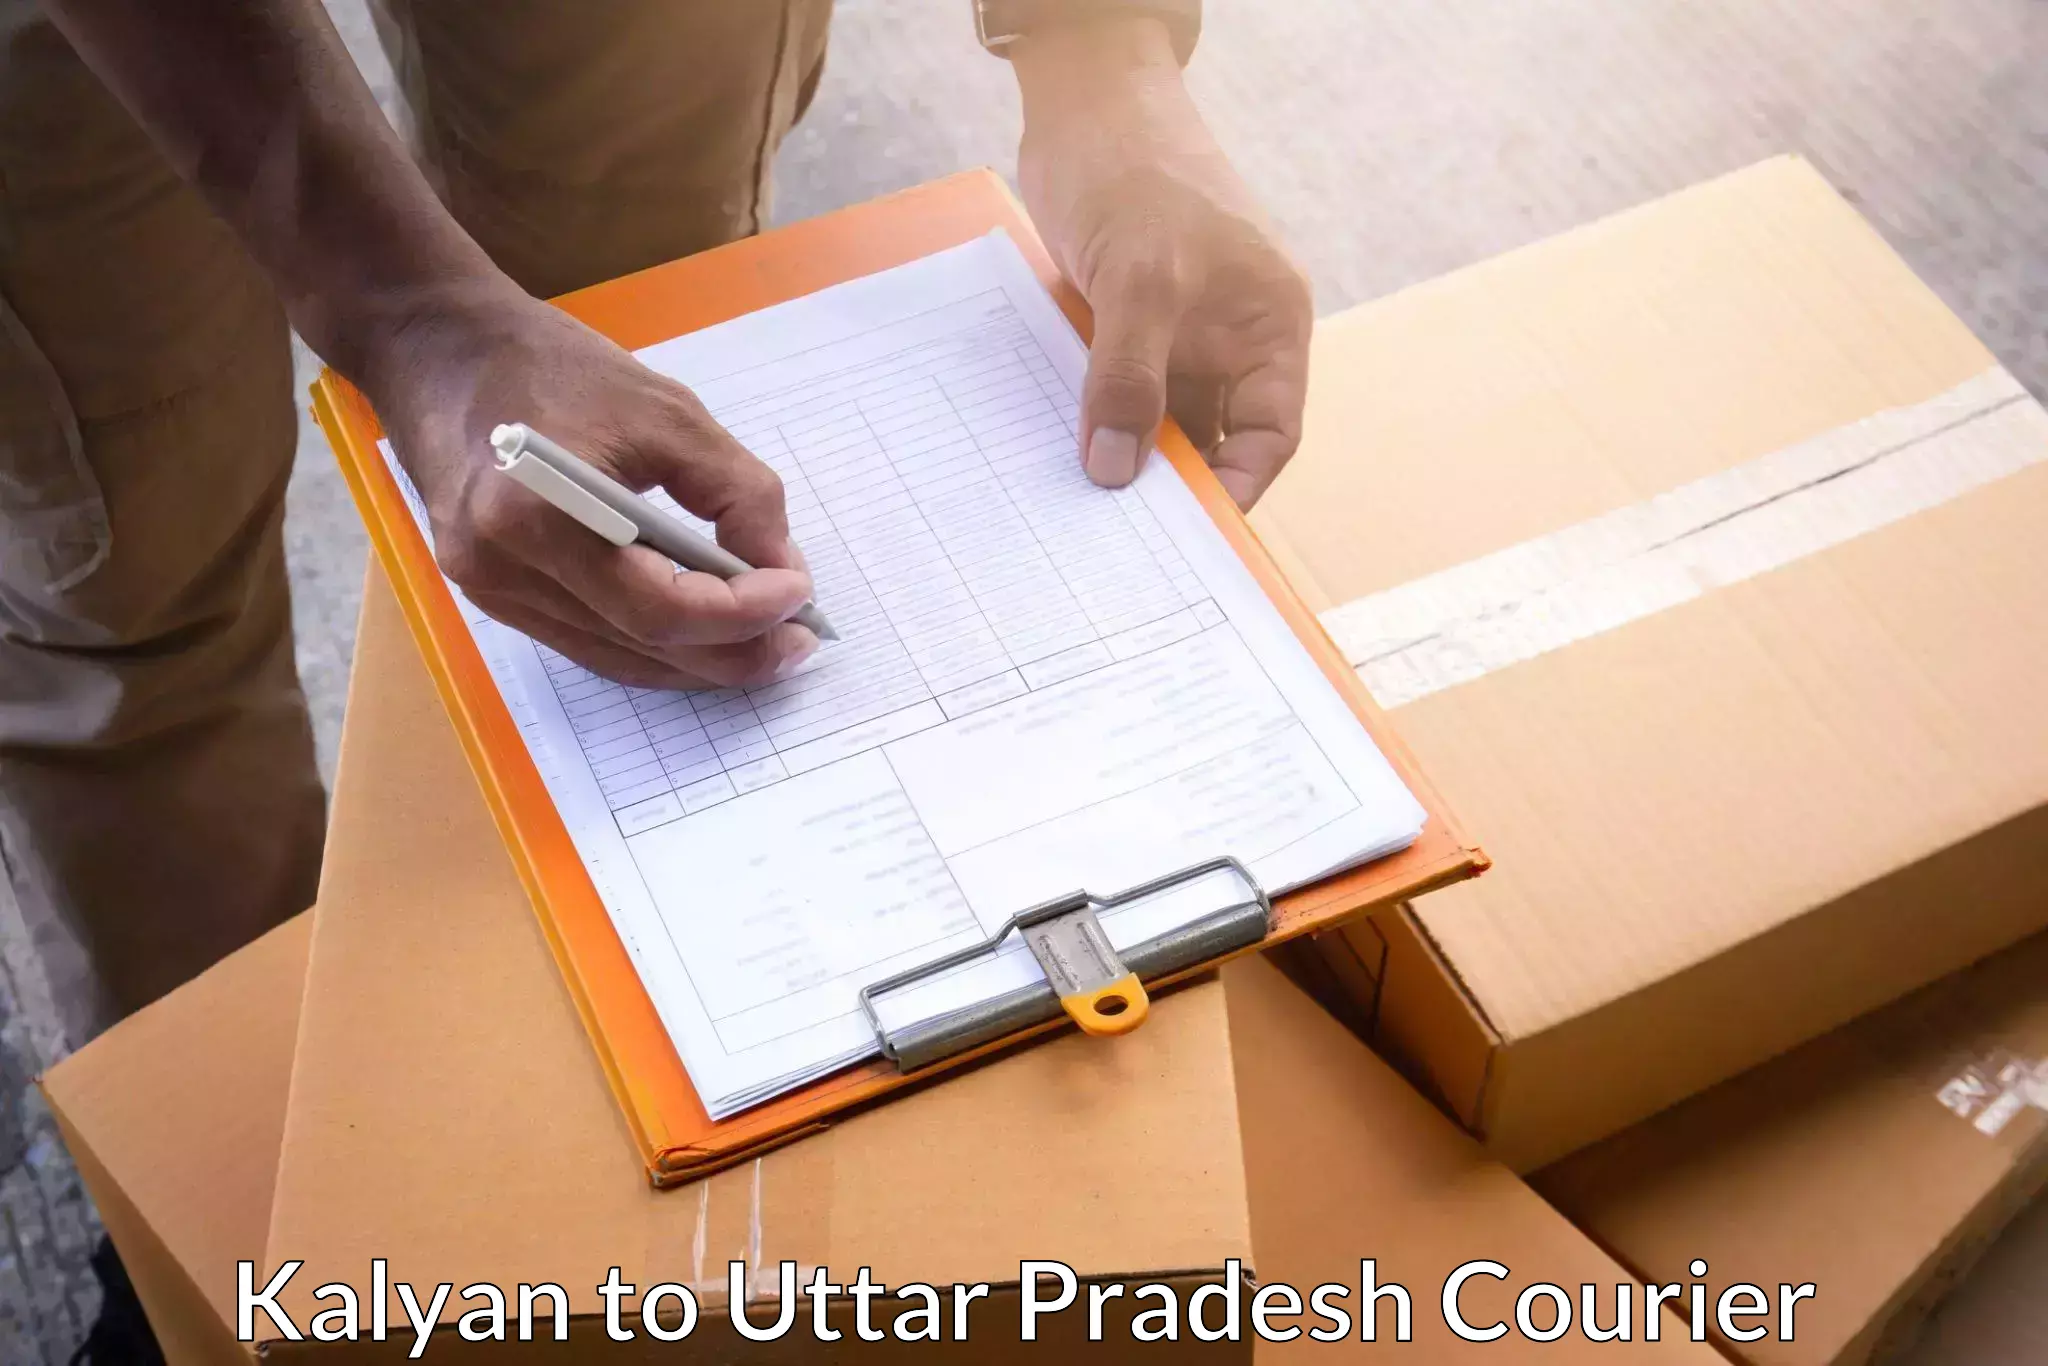 Express delivery capabilities in Kalyan to Akbarpur